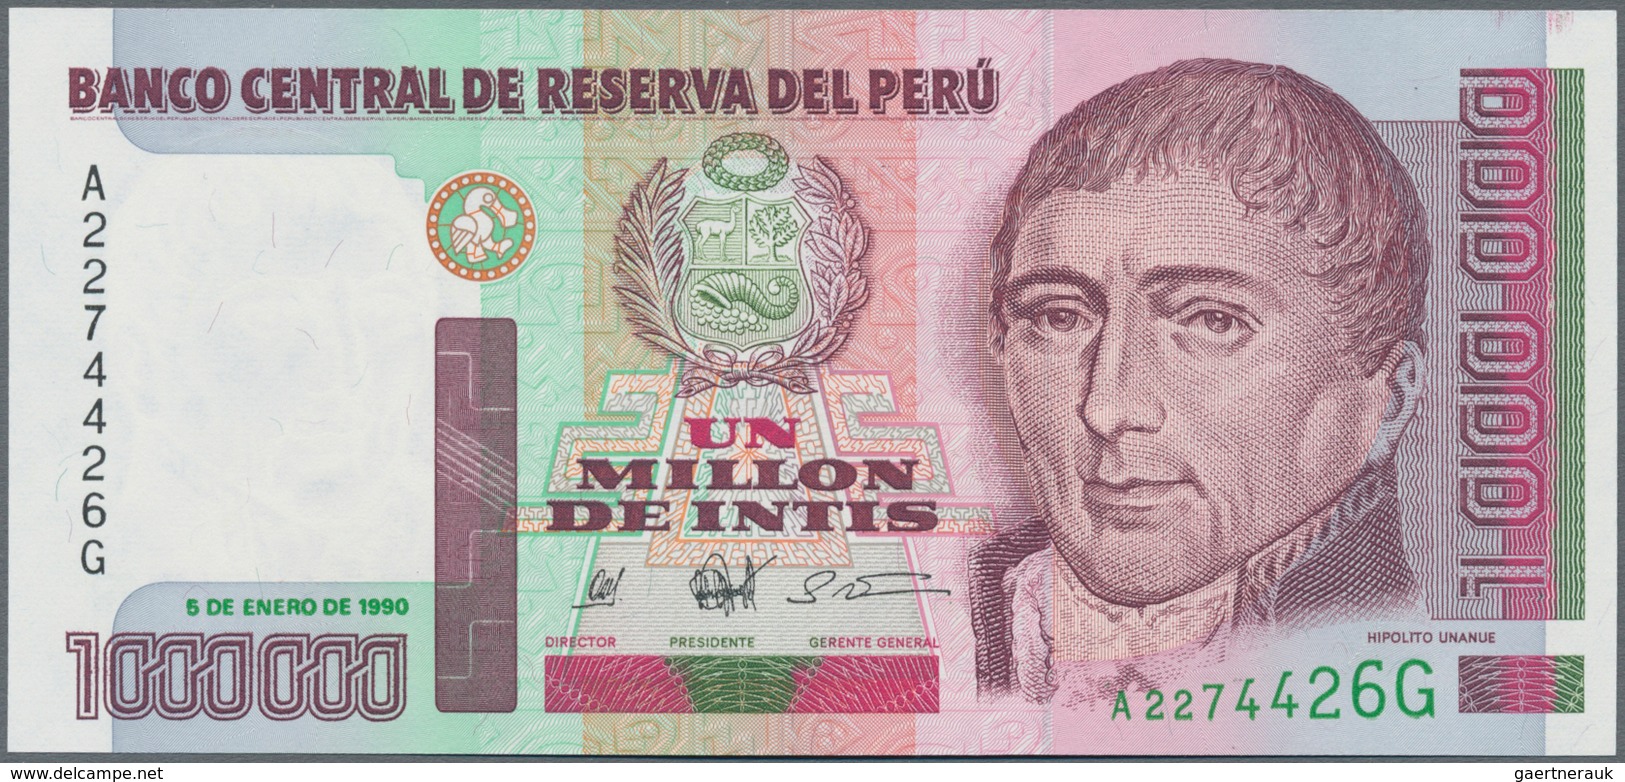 Peru: Huge lot with 41 banknotes 1921 – 1990 including for example ½ Libra and 1 Sol 1921 (VF, VF+),